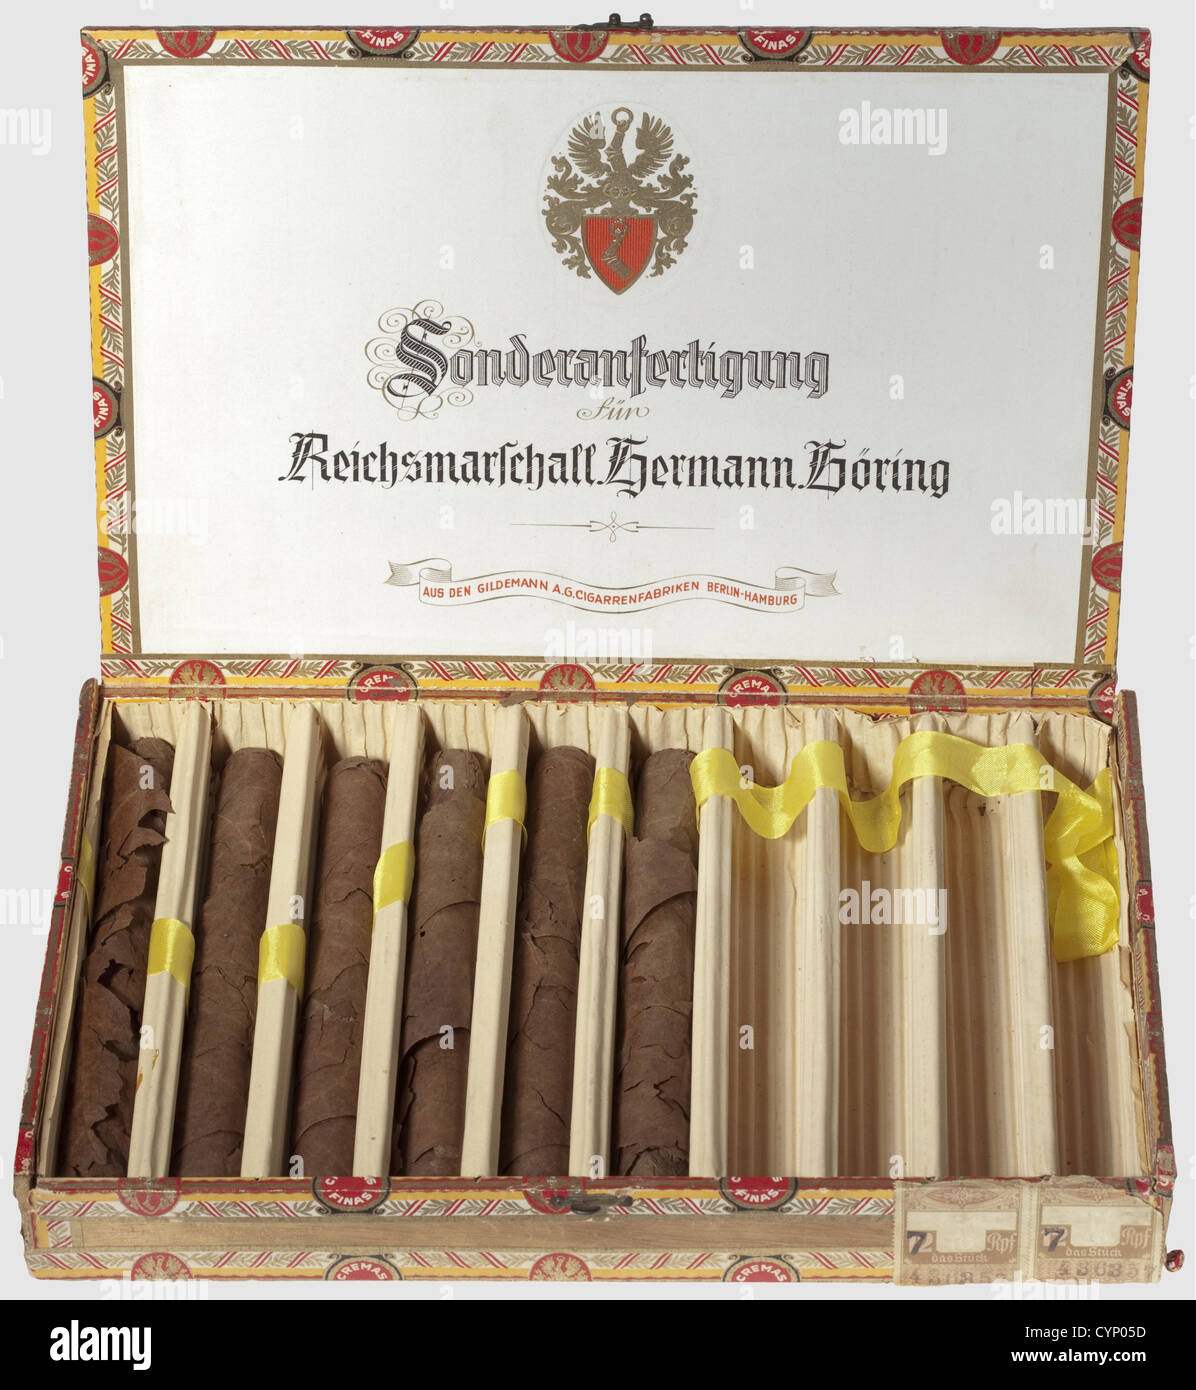 Hermann Göring - a cigar box with six cigars,from the 'Sonderanfertigung für Reichsmarschall Hermann Göring '(Specially Made for Reichsmarschall Hermann Göring).The cigars unprotected in the box,the wrappers dissolved.The wooden box is richly ornamented with decorative stripes.The lid has Göring's coat of arms in gold relief on the outside,the inside lid bears the above mentioned inscription with his coat of arms above the manufacturer's scroll,reading 'aus den Gildemann A.G.Cigarrenfabriken Berlin-Hamburg'(from Gildemann Ltd.Cigar Manufacturers Berl,Additional-Rights-Clearences-Not Available Stock Photo